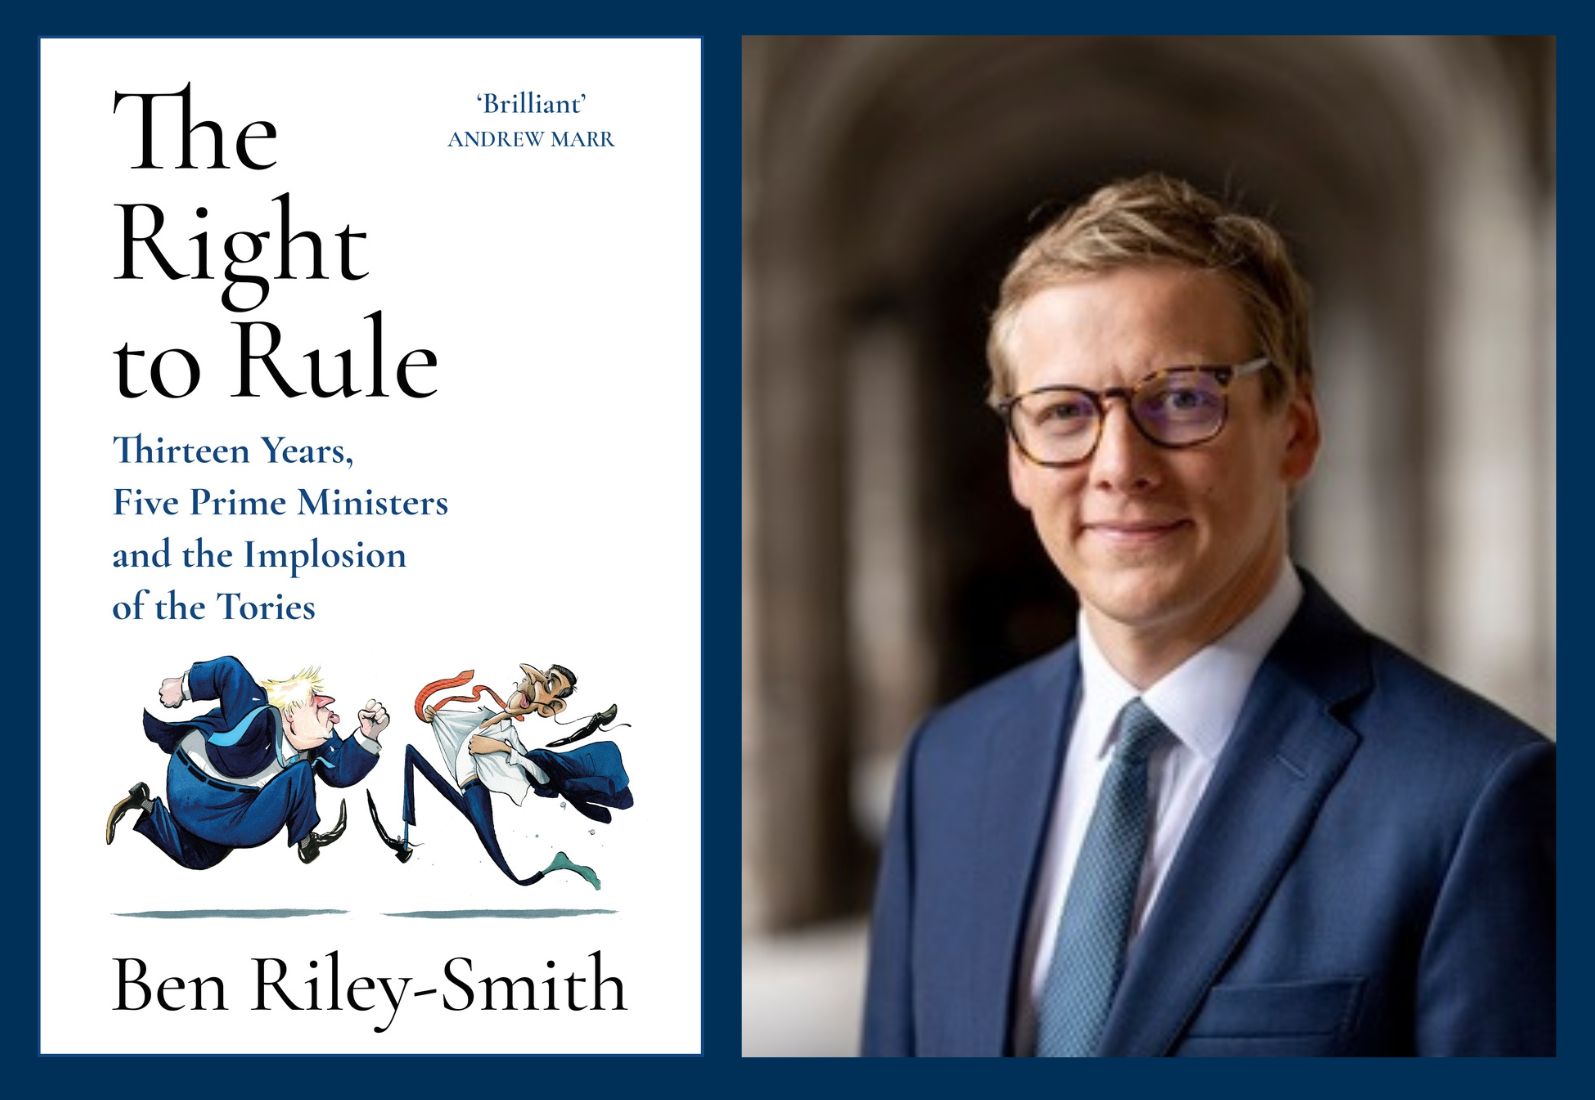 Ben Riley Smith will talk about the last 13 years of Tory rule at Raworths Harrogate Literature Festival